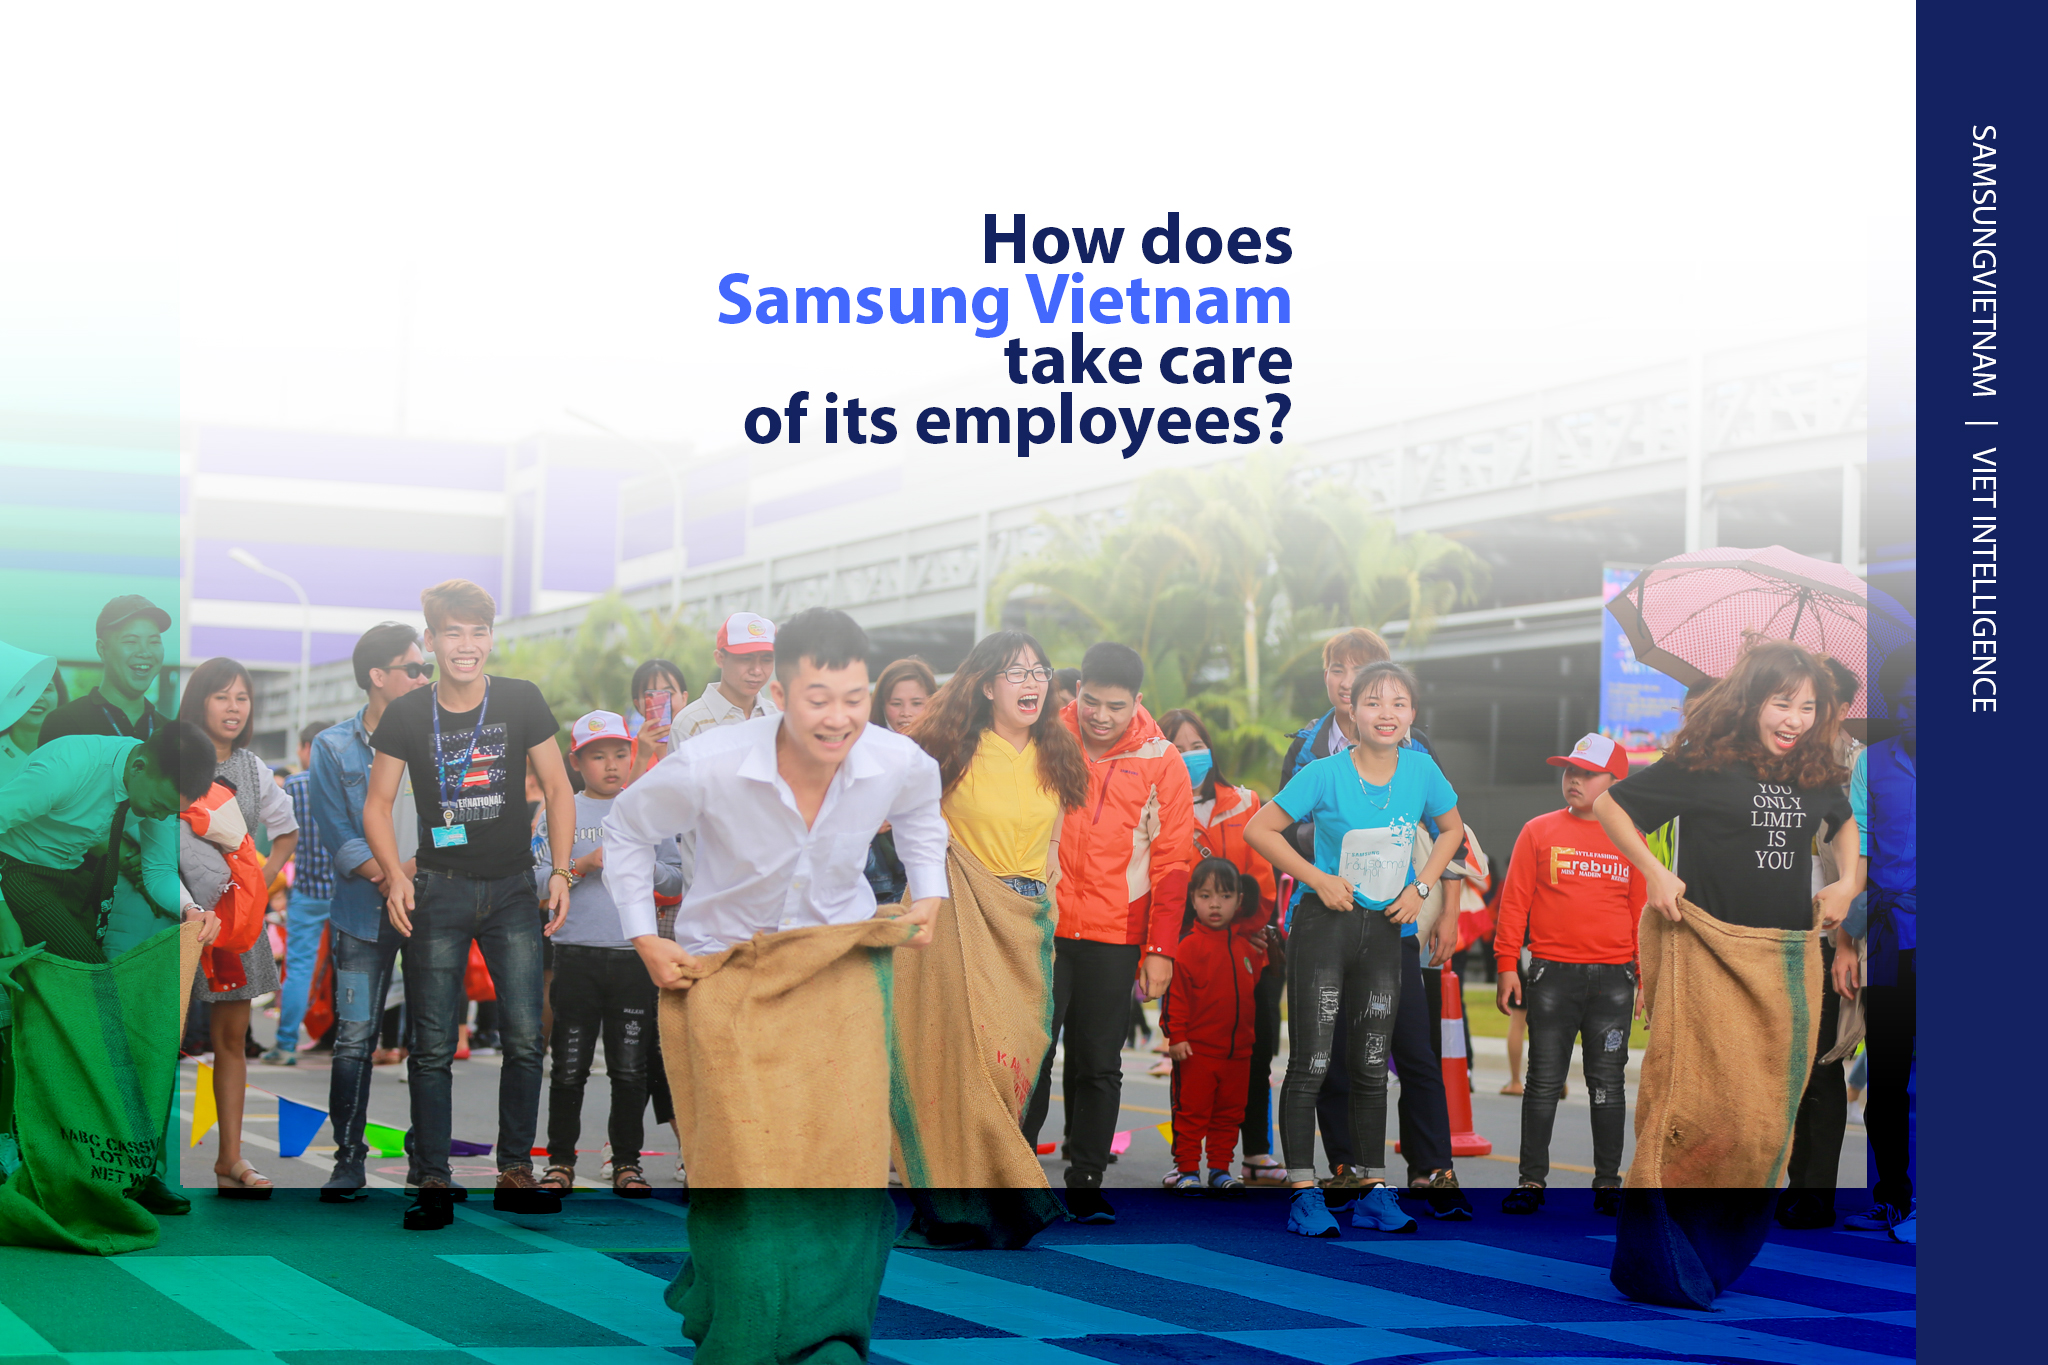 How does Samsung Vietnam take care of its employees?